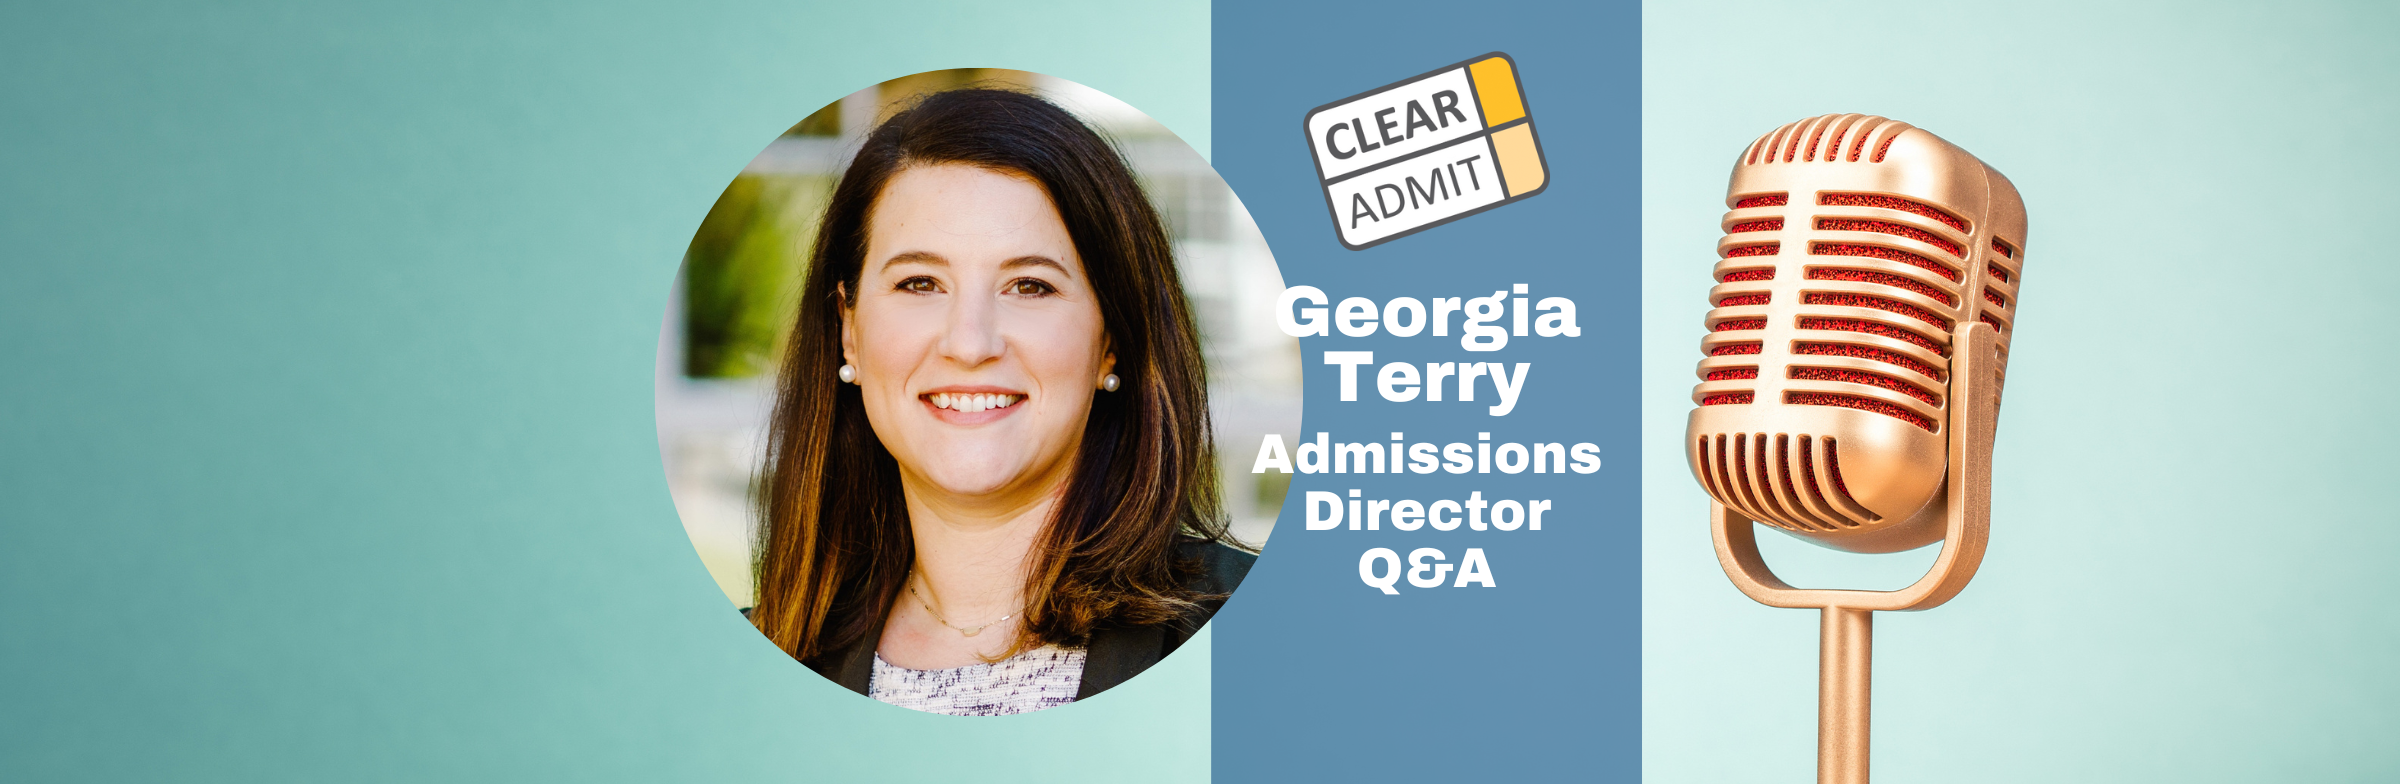 Image for Admissions Director Q&A: Cara Sonnier of the University of Georgia Terry College of Business